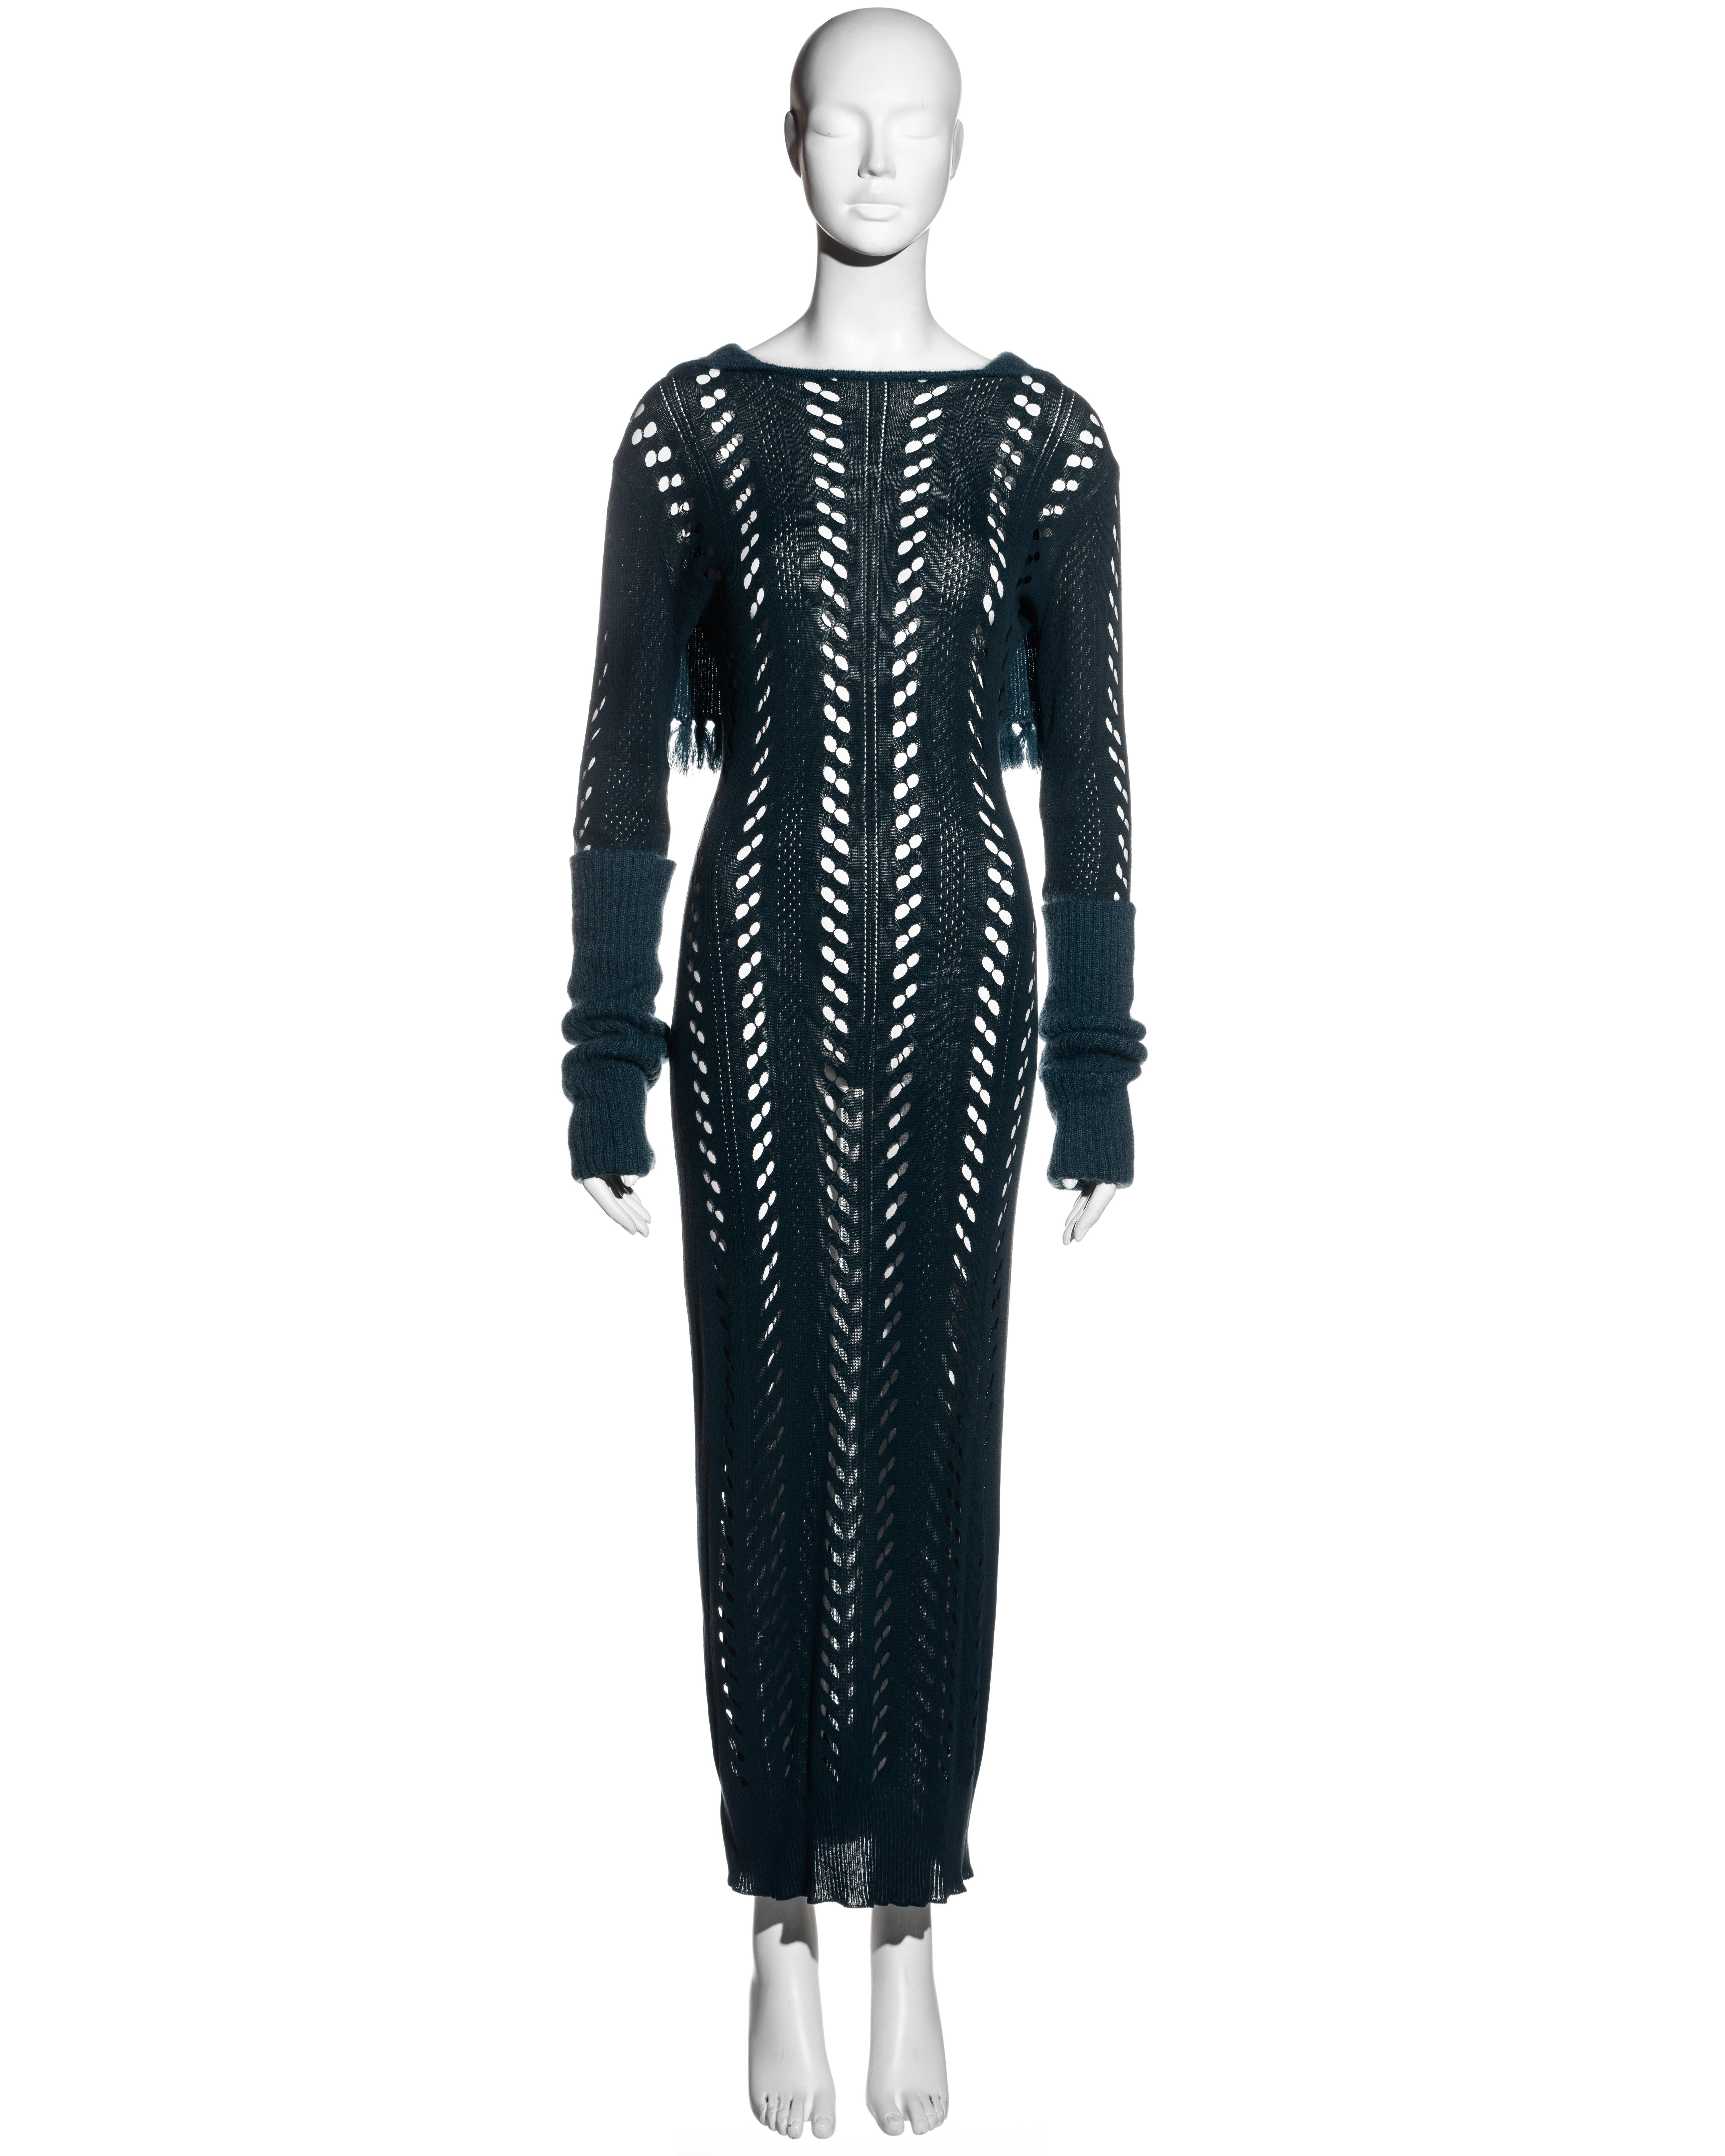 ▪ Christian Dior teal laser-cut knitted maxi dress
▪ Designed by John Galliano
▪ Mohair sailor collar with tassels 
▪ Long mohair turn-up cuffs
▪ Sold with matching Dior slip dress
▪ FR 42 - UK 14 - US 10
▪ 70% Cotton, 20% Mohair, 10% Nylon
▪